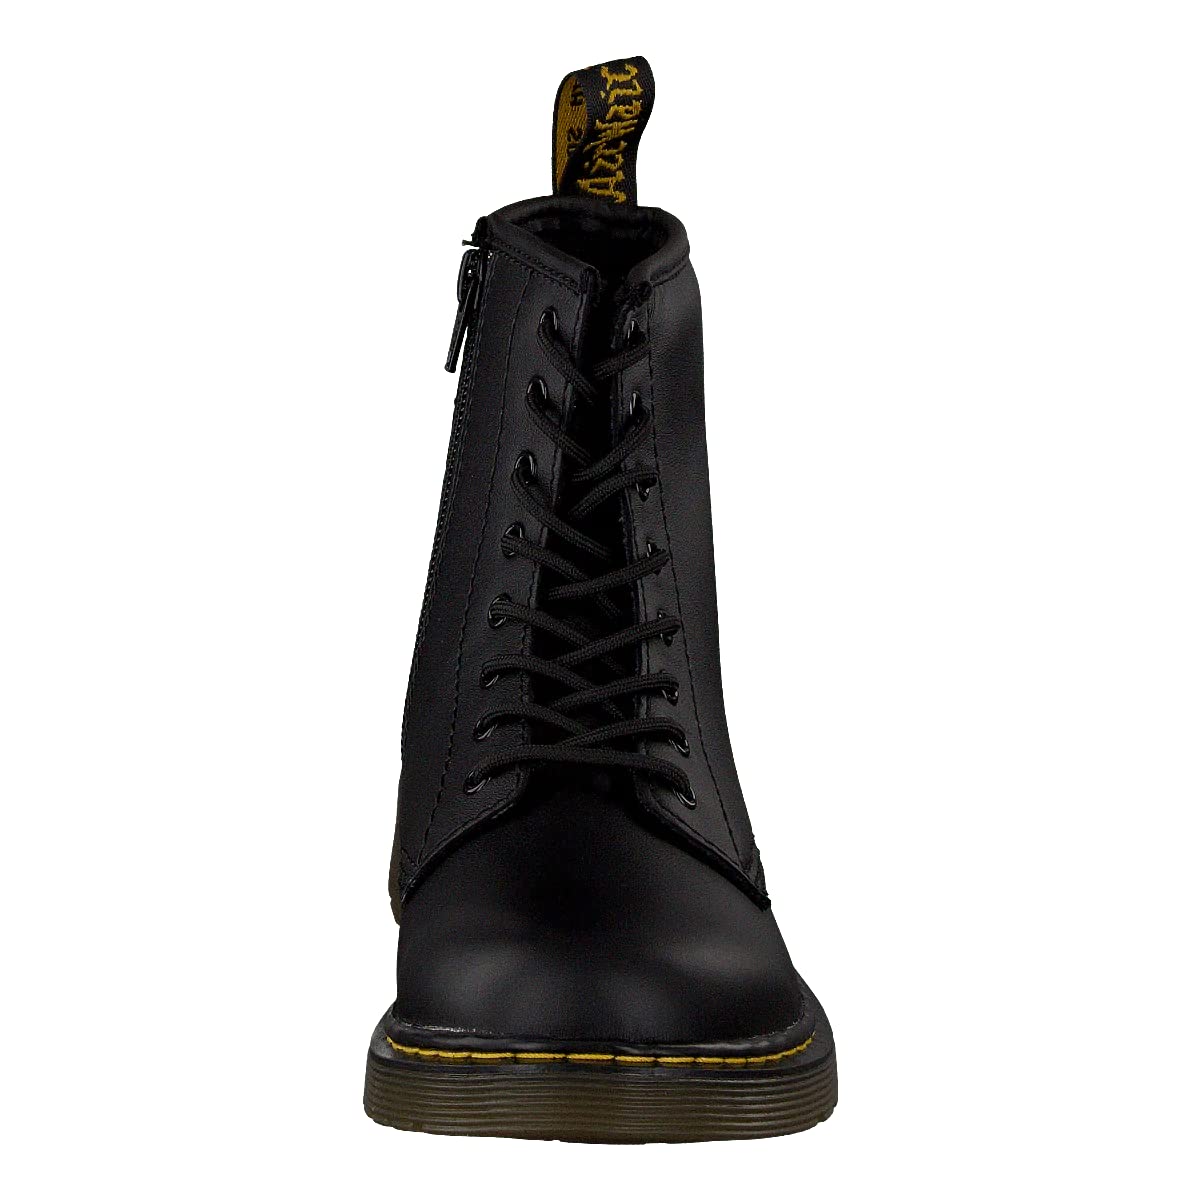 Dr. Martens, Kids Collection 1460 Boots